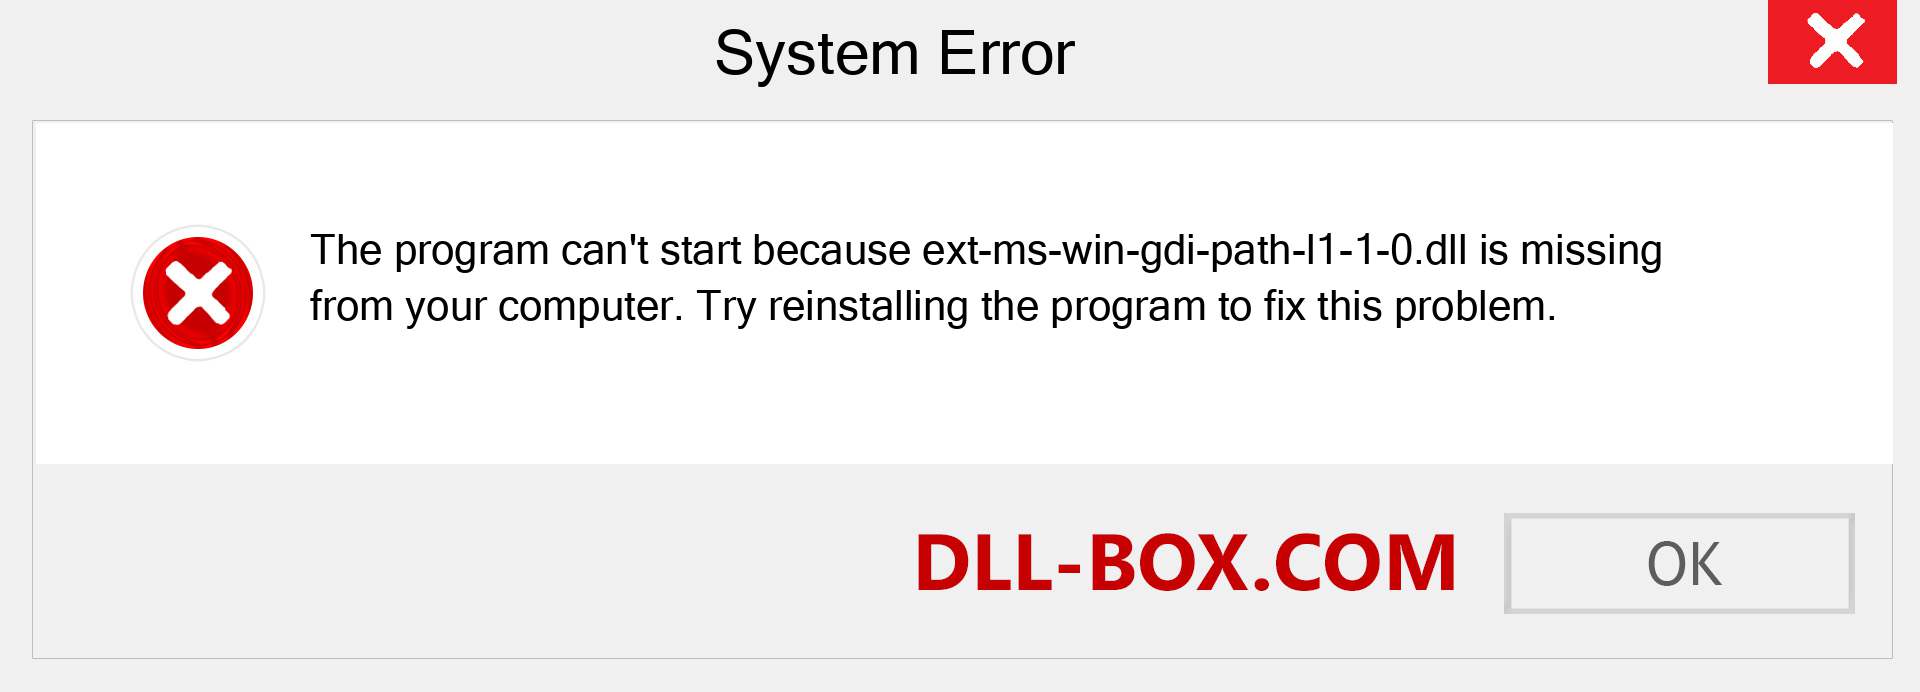  ext-ms-win-gdi-path-l1-1-0.dll file is missing?. Download for Windows 7, 8, 10 - Fix  ext-ms-win-gdi-path-l1-1-0 dll Missing Error on Windows, photos, images